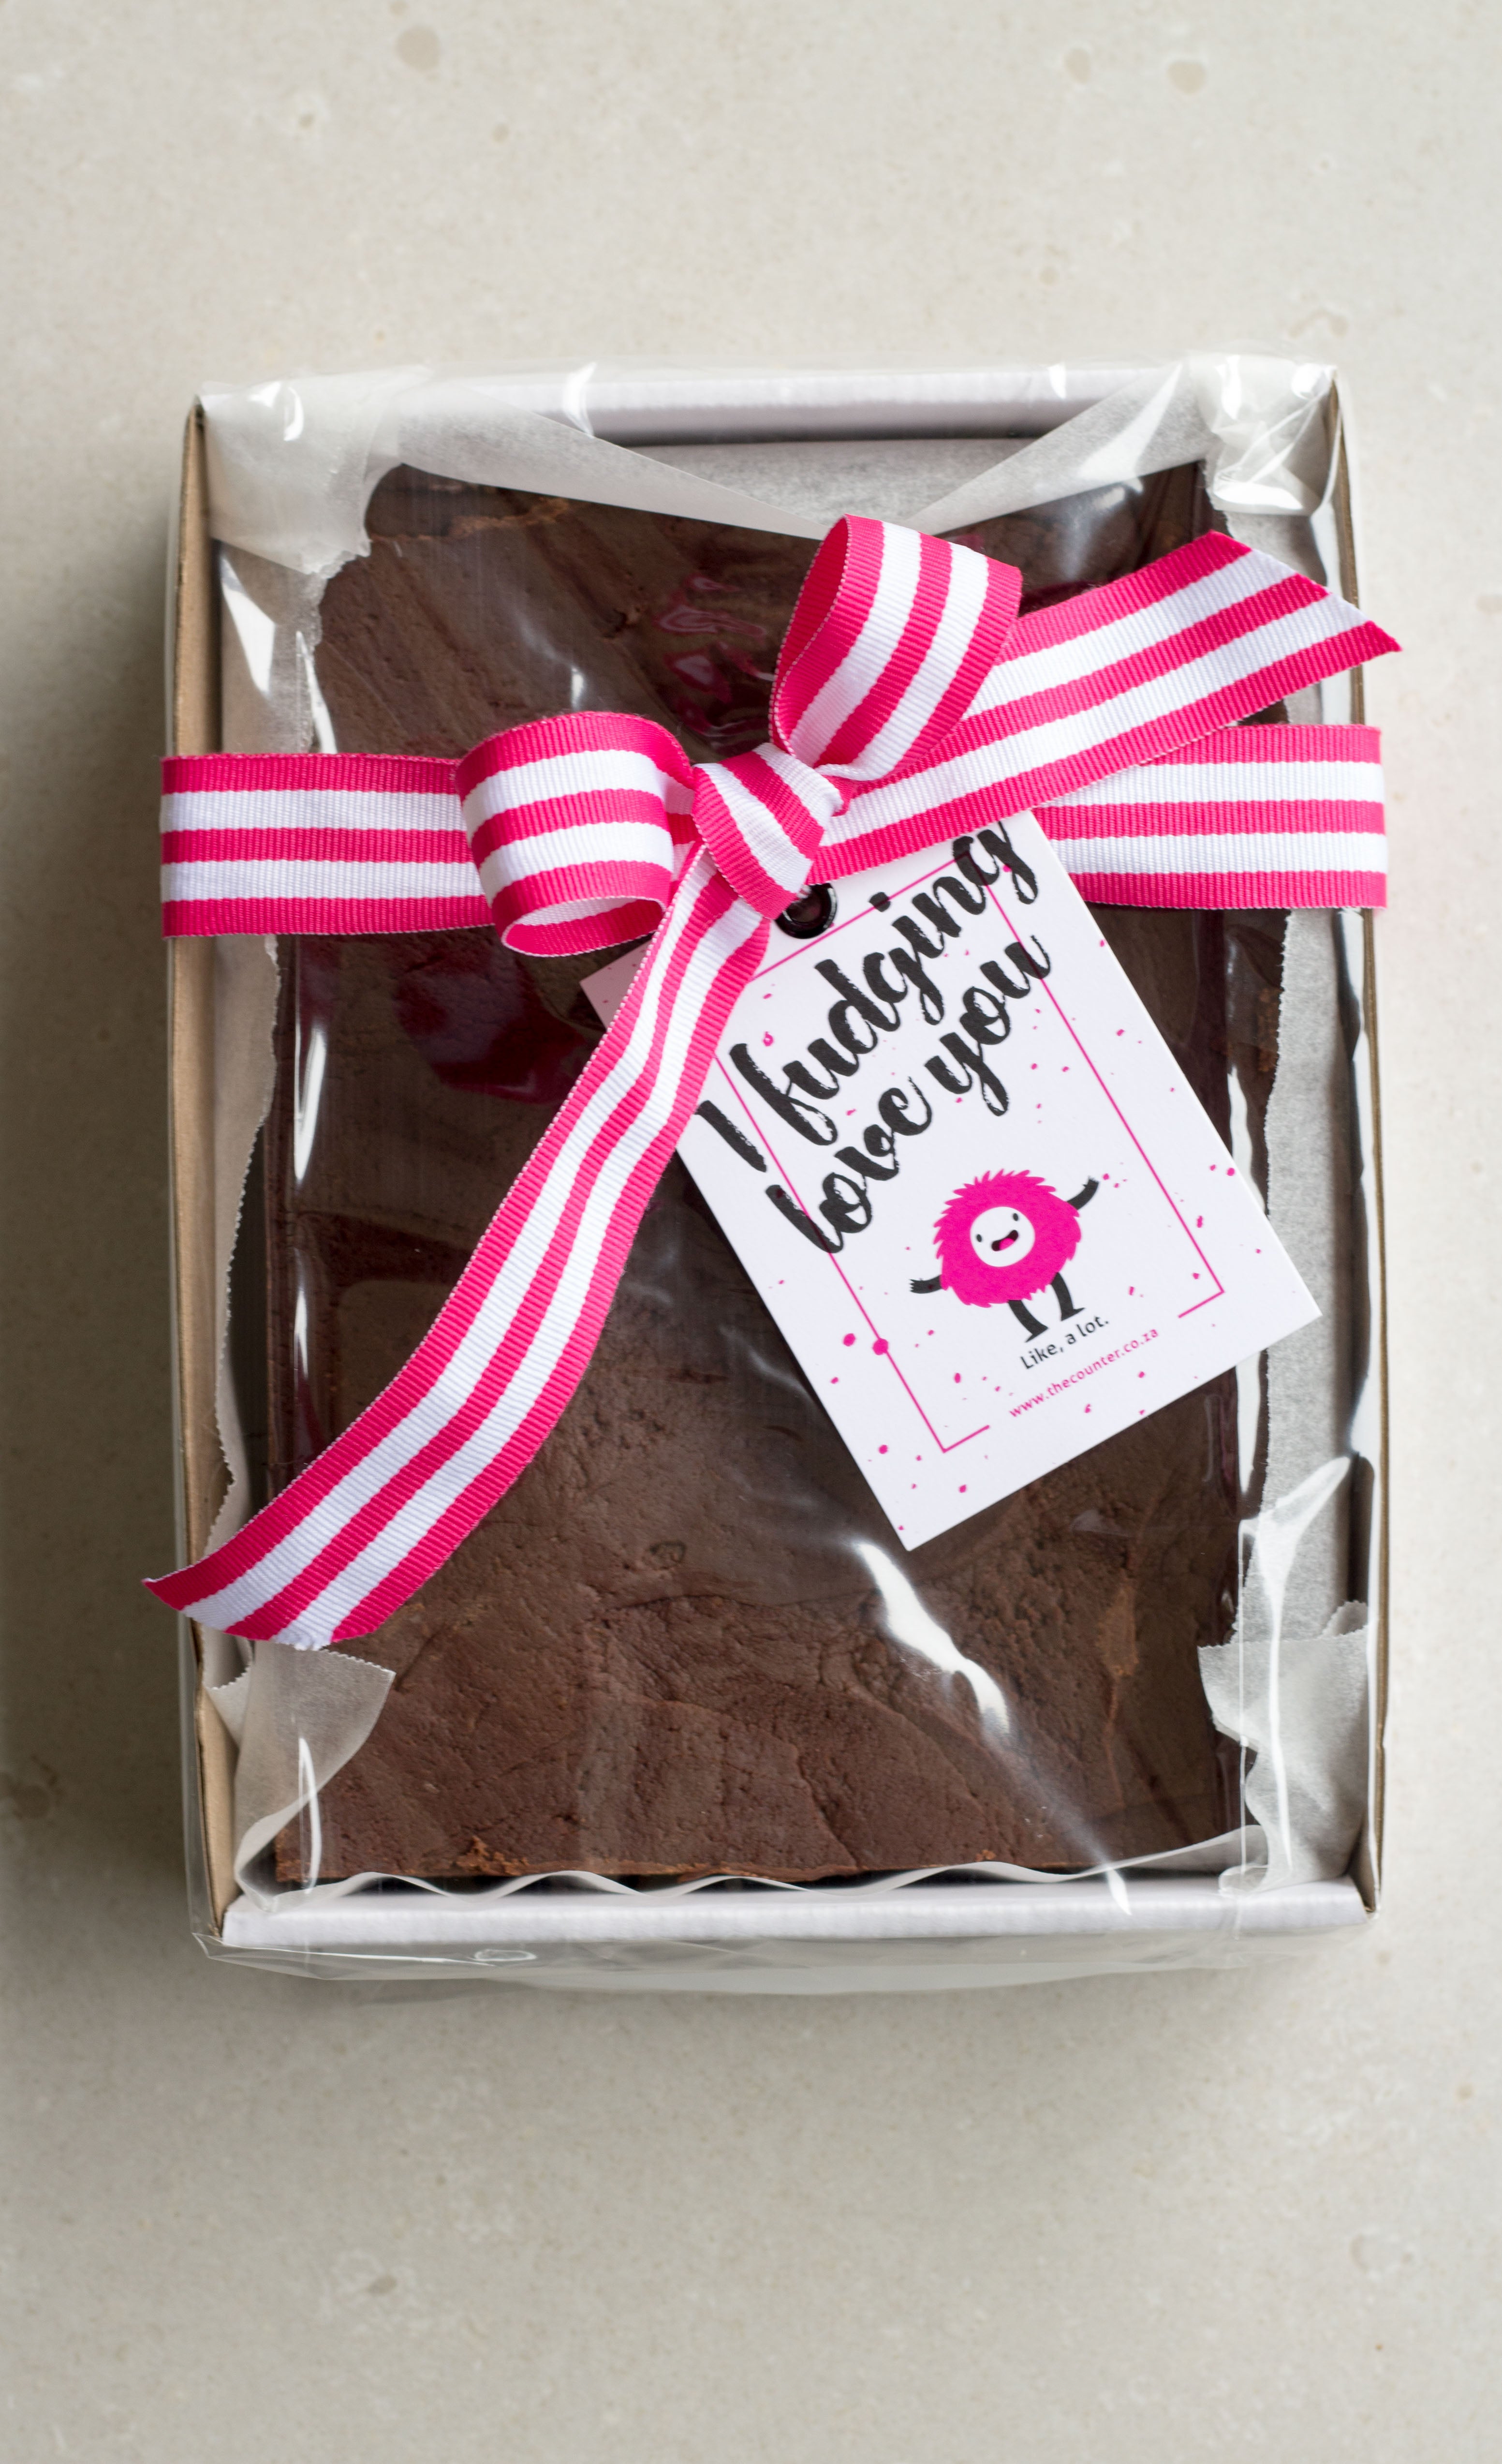 One kilogram cookies and cream fudge slab in a sturdy cardboard tray, finished with a pink striped ribbon and 'I Fudging Love You' swing tag